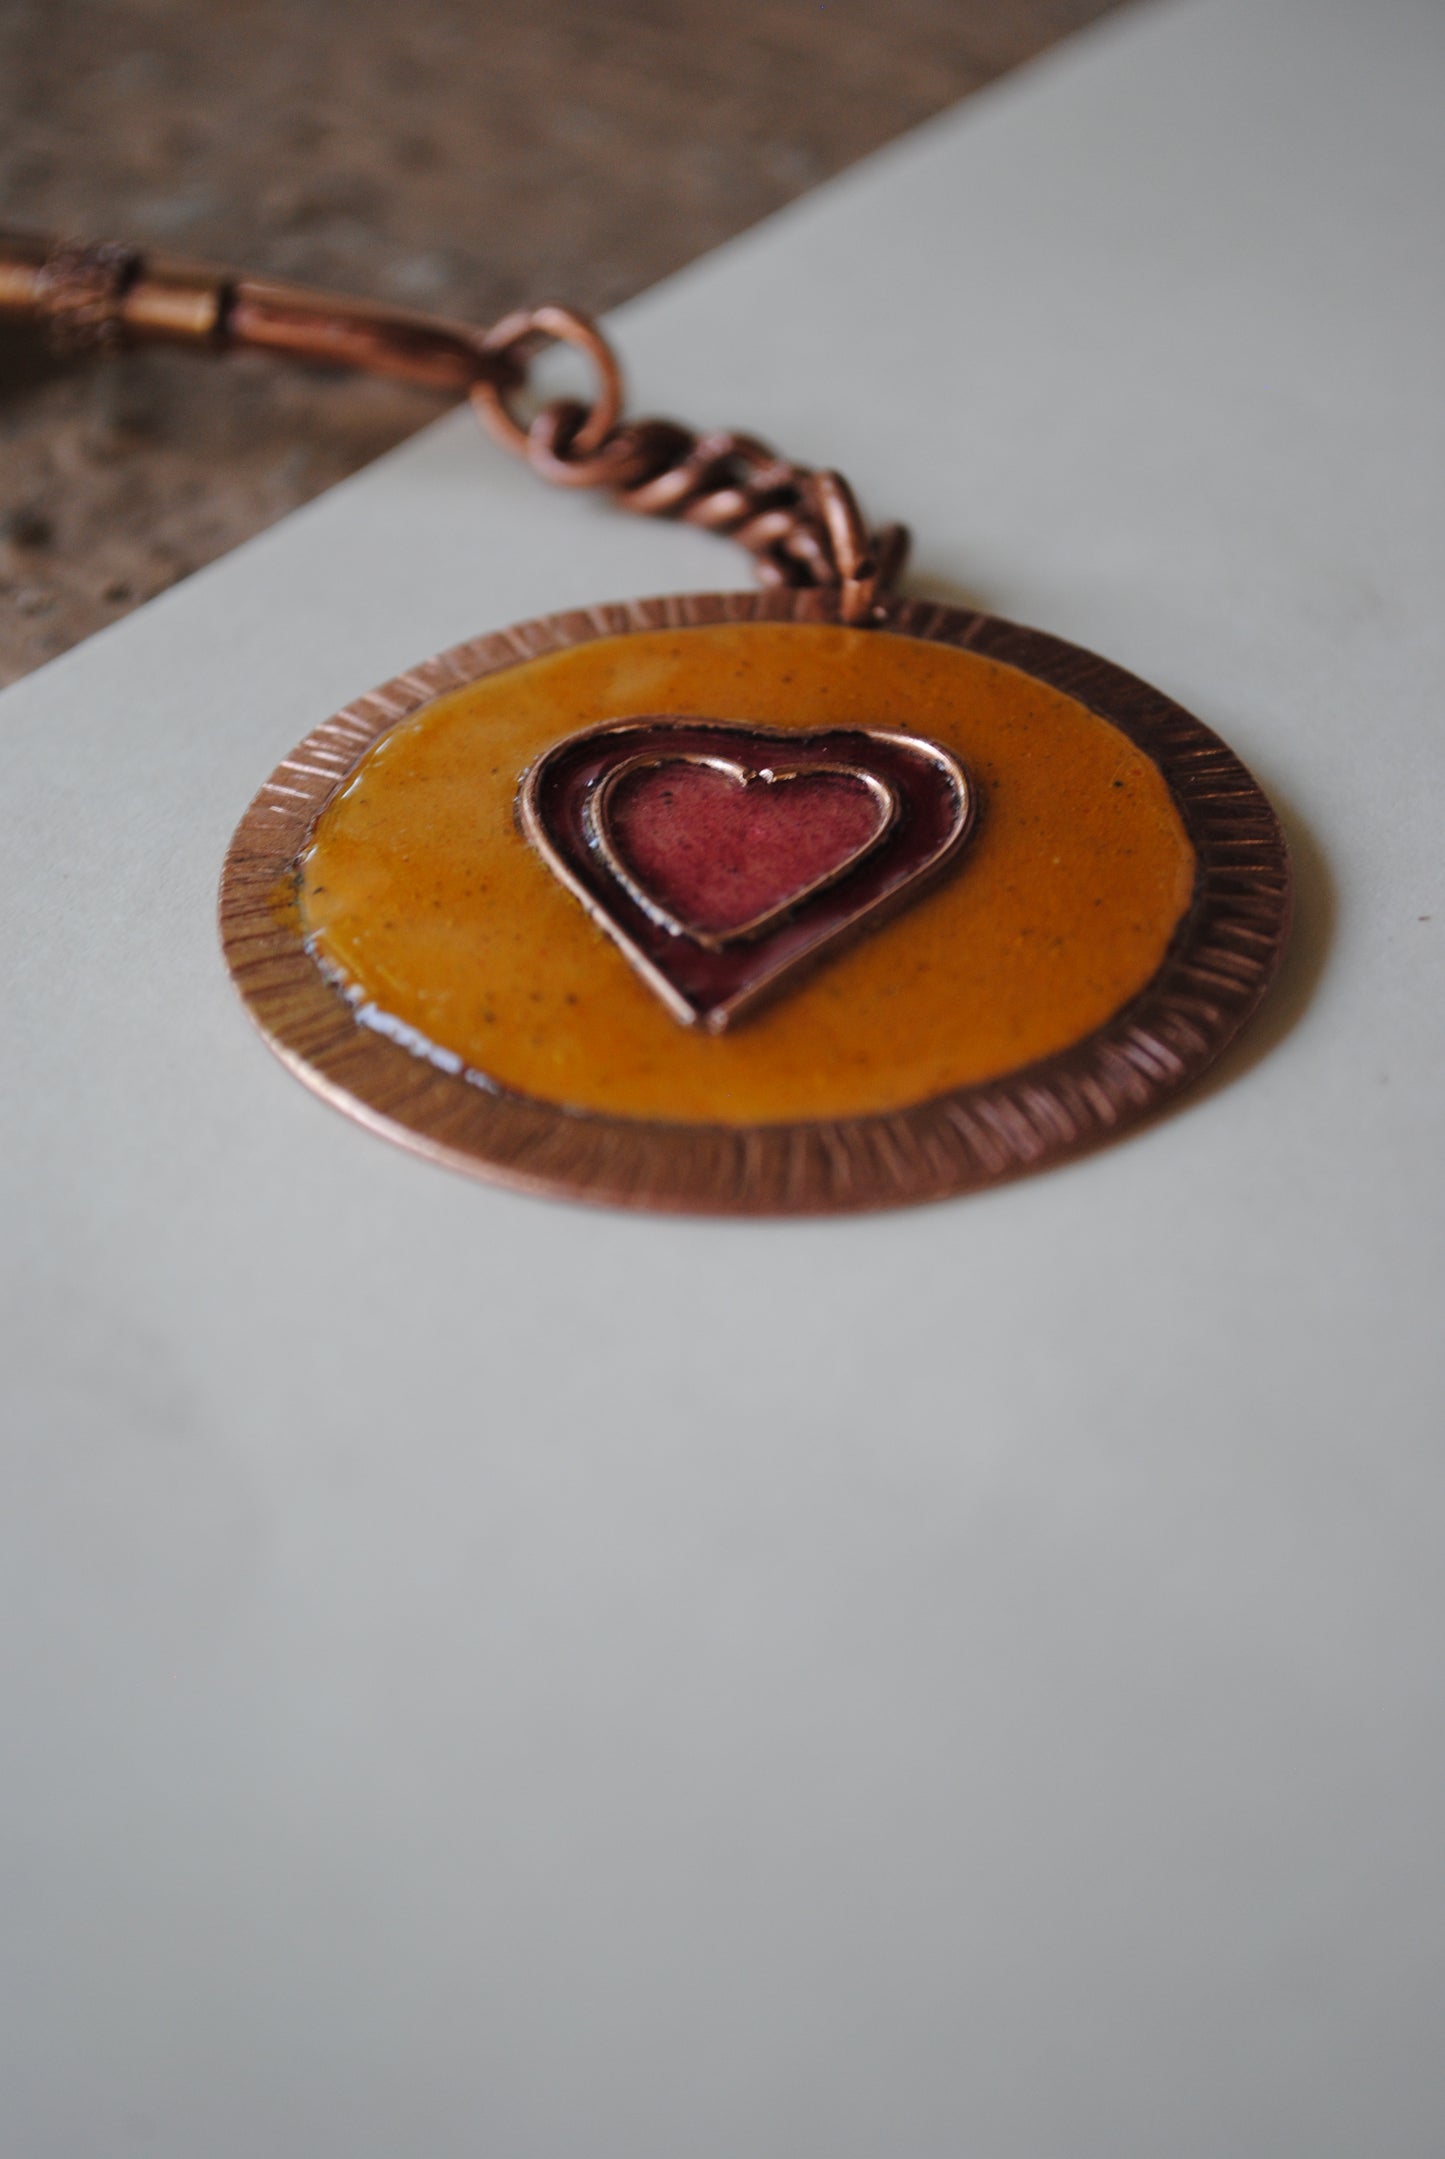 Copper enamel trinkets, funky keychains handcrafted in Maharashtra, India. Dil heart theme